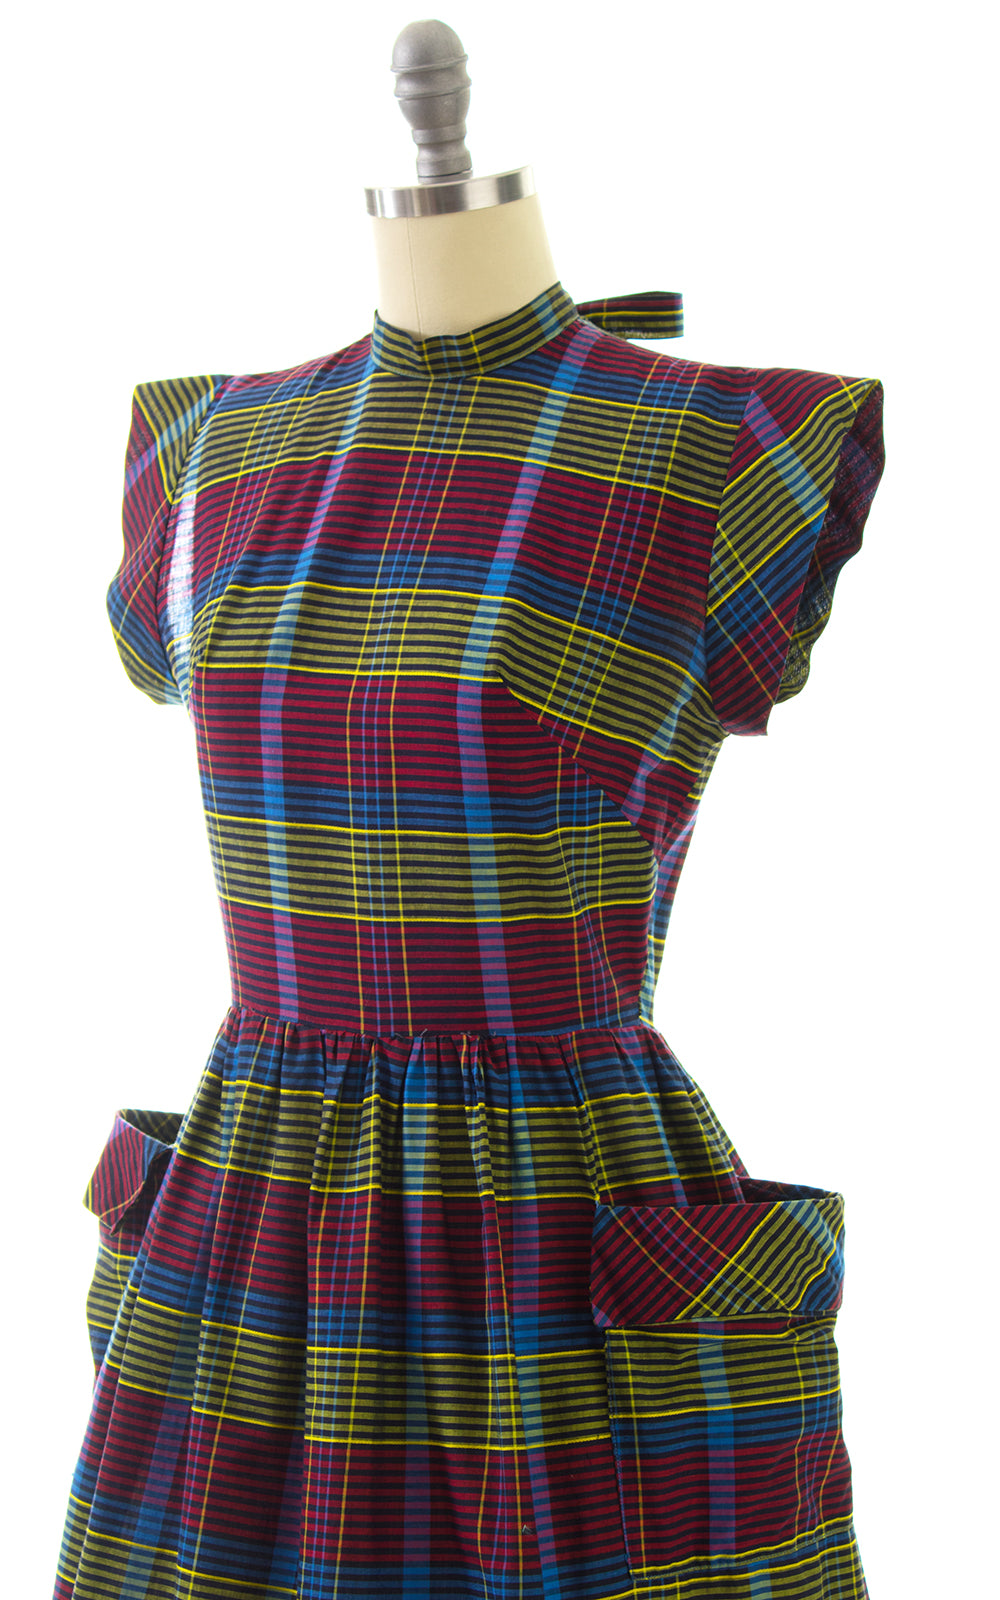 1950s Plaid Cotton Dress with Pockets